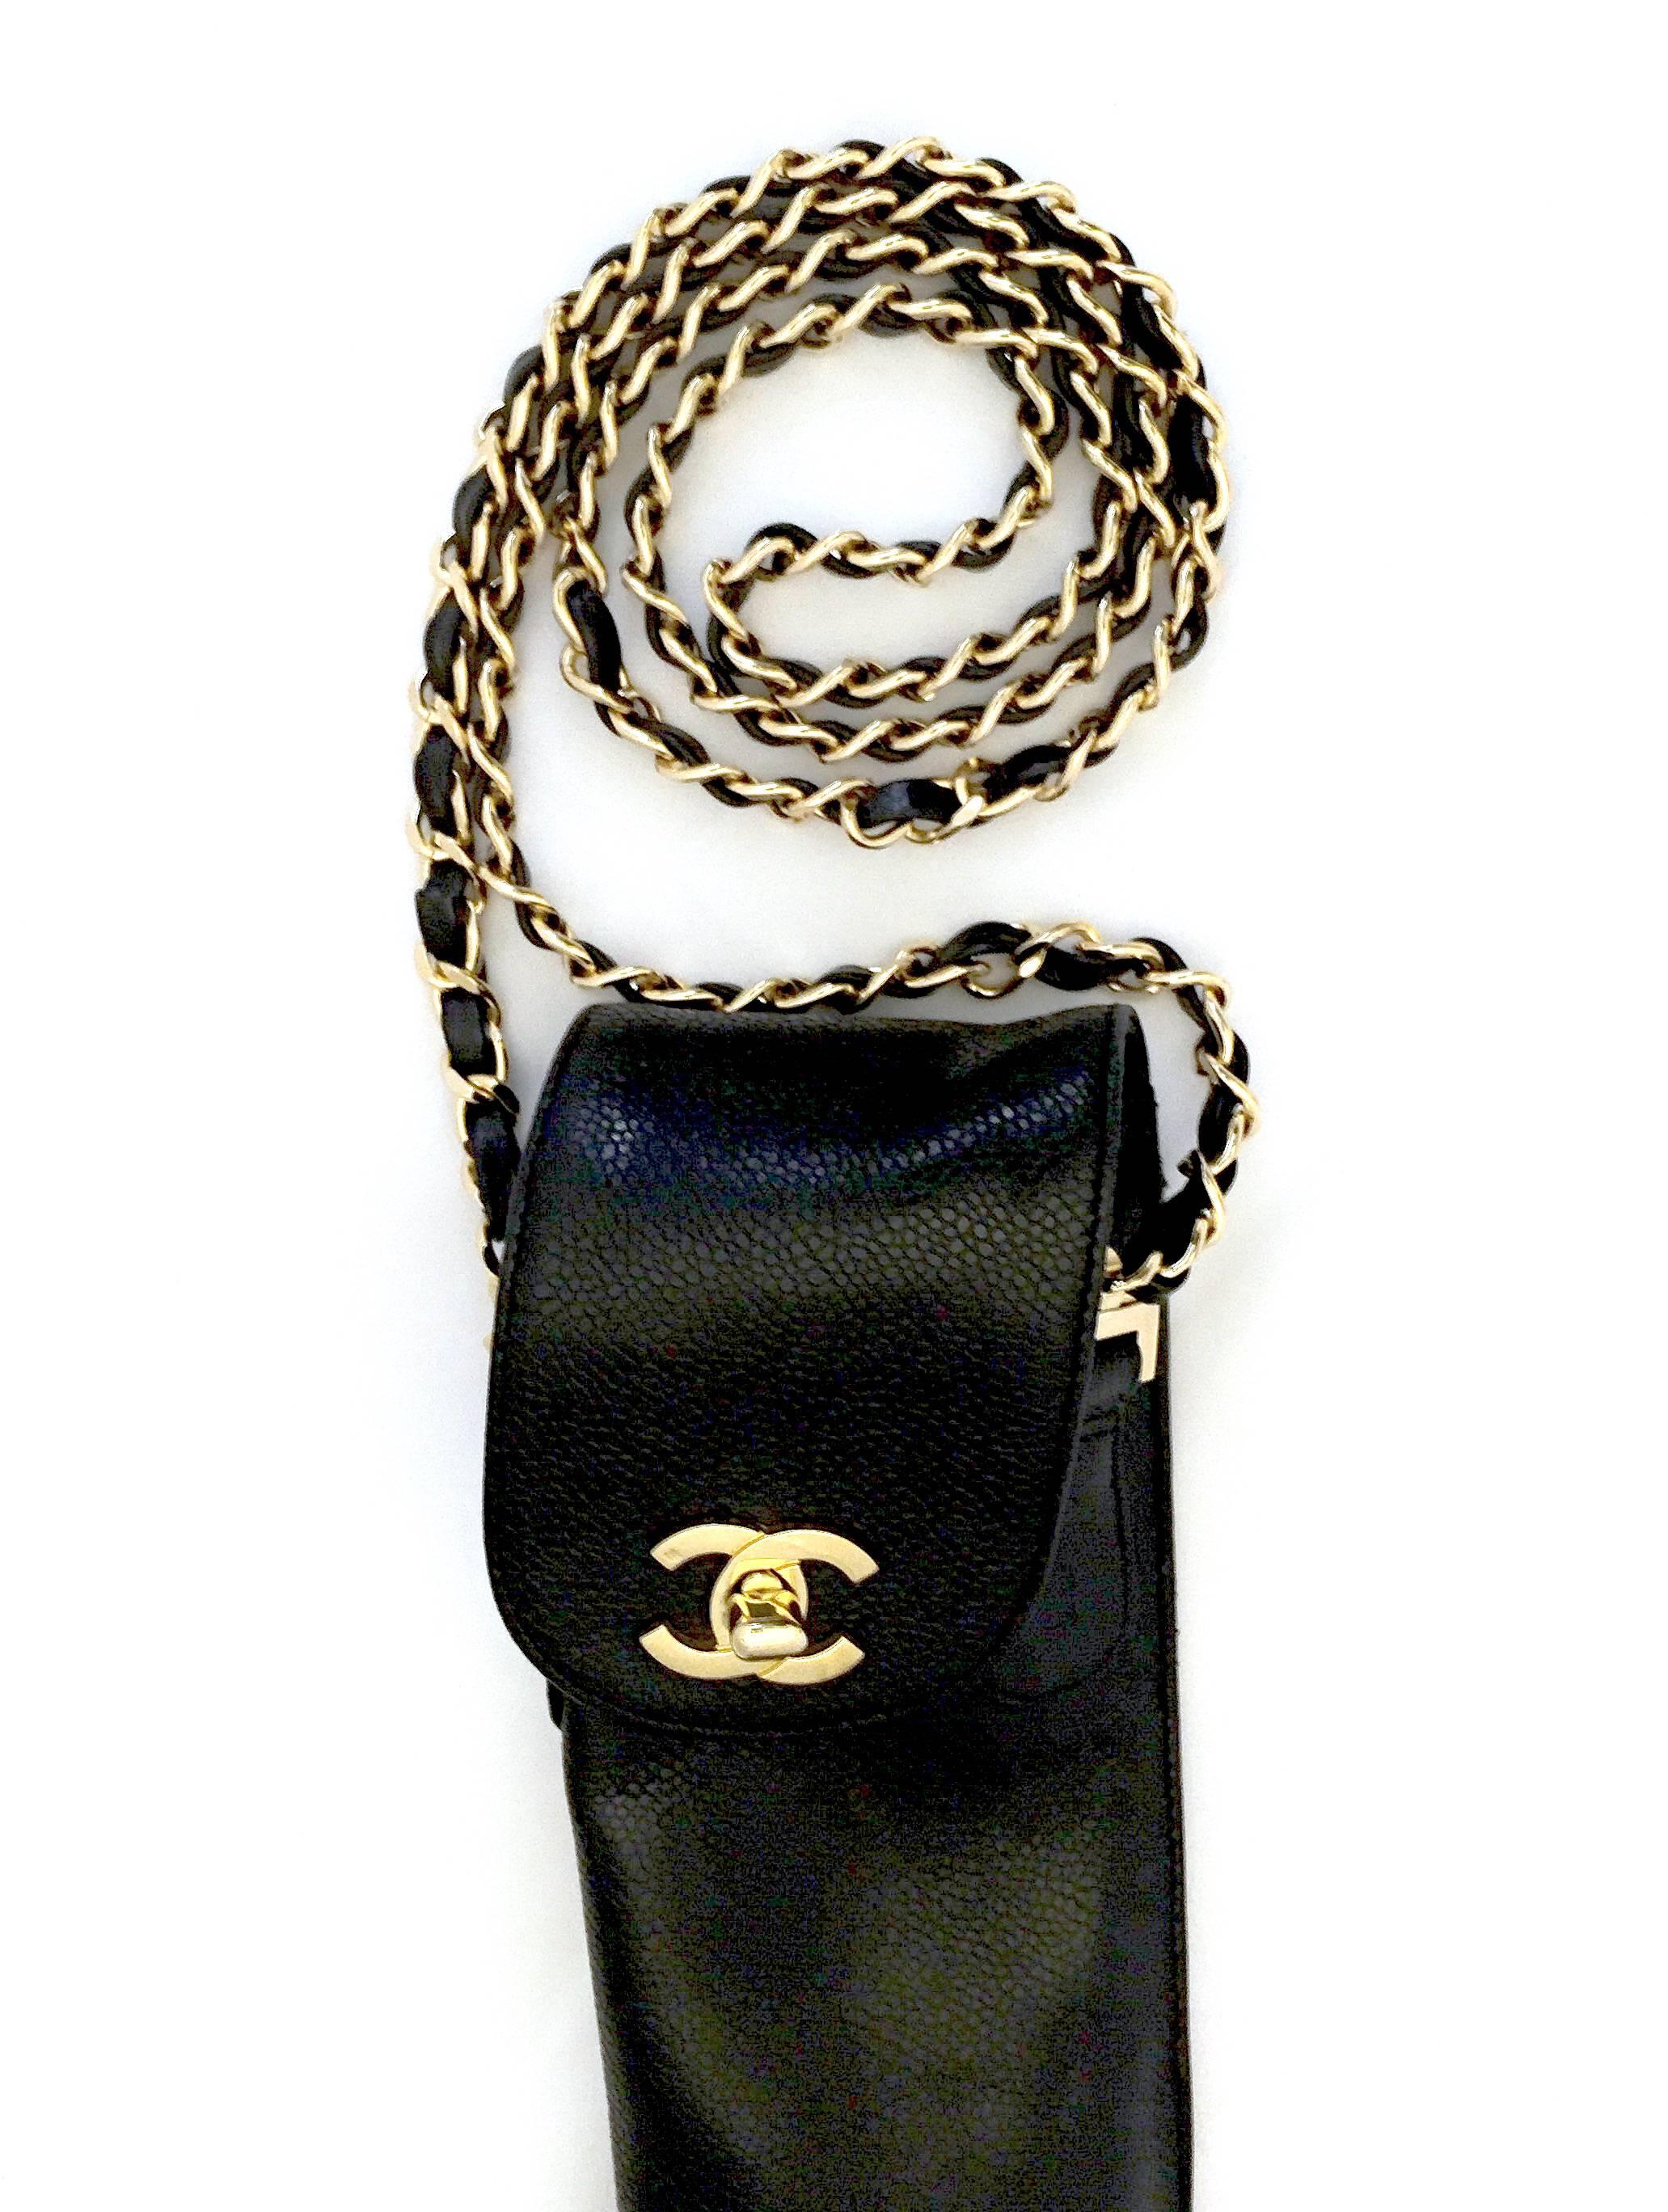 Chanel black caviar leather umbrella case from 1995 with gold-tone hardware, front flap and CC turn-lock closure, chain and leather strap, and slide back pocket. Does not include umbrella.

Measurements:  Handle Drop 21”, Height 17”, Width 3”